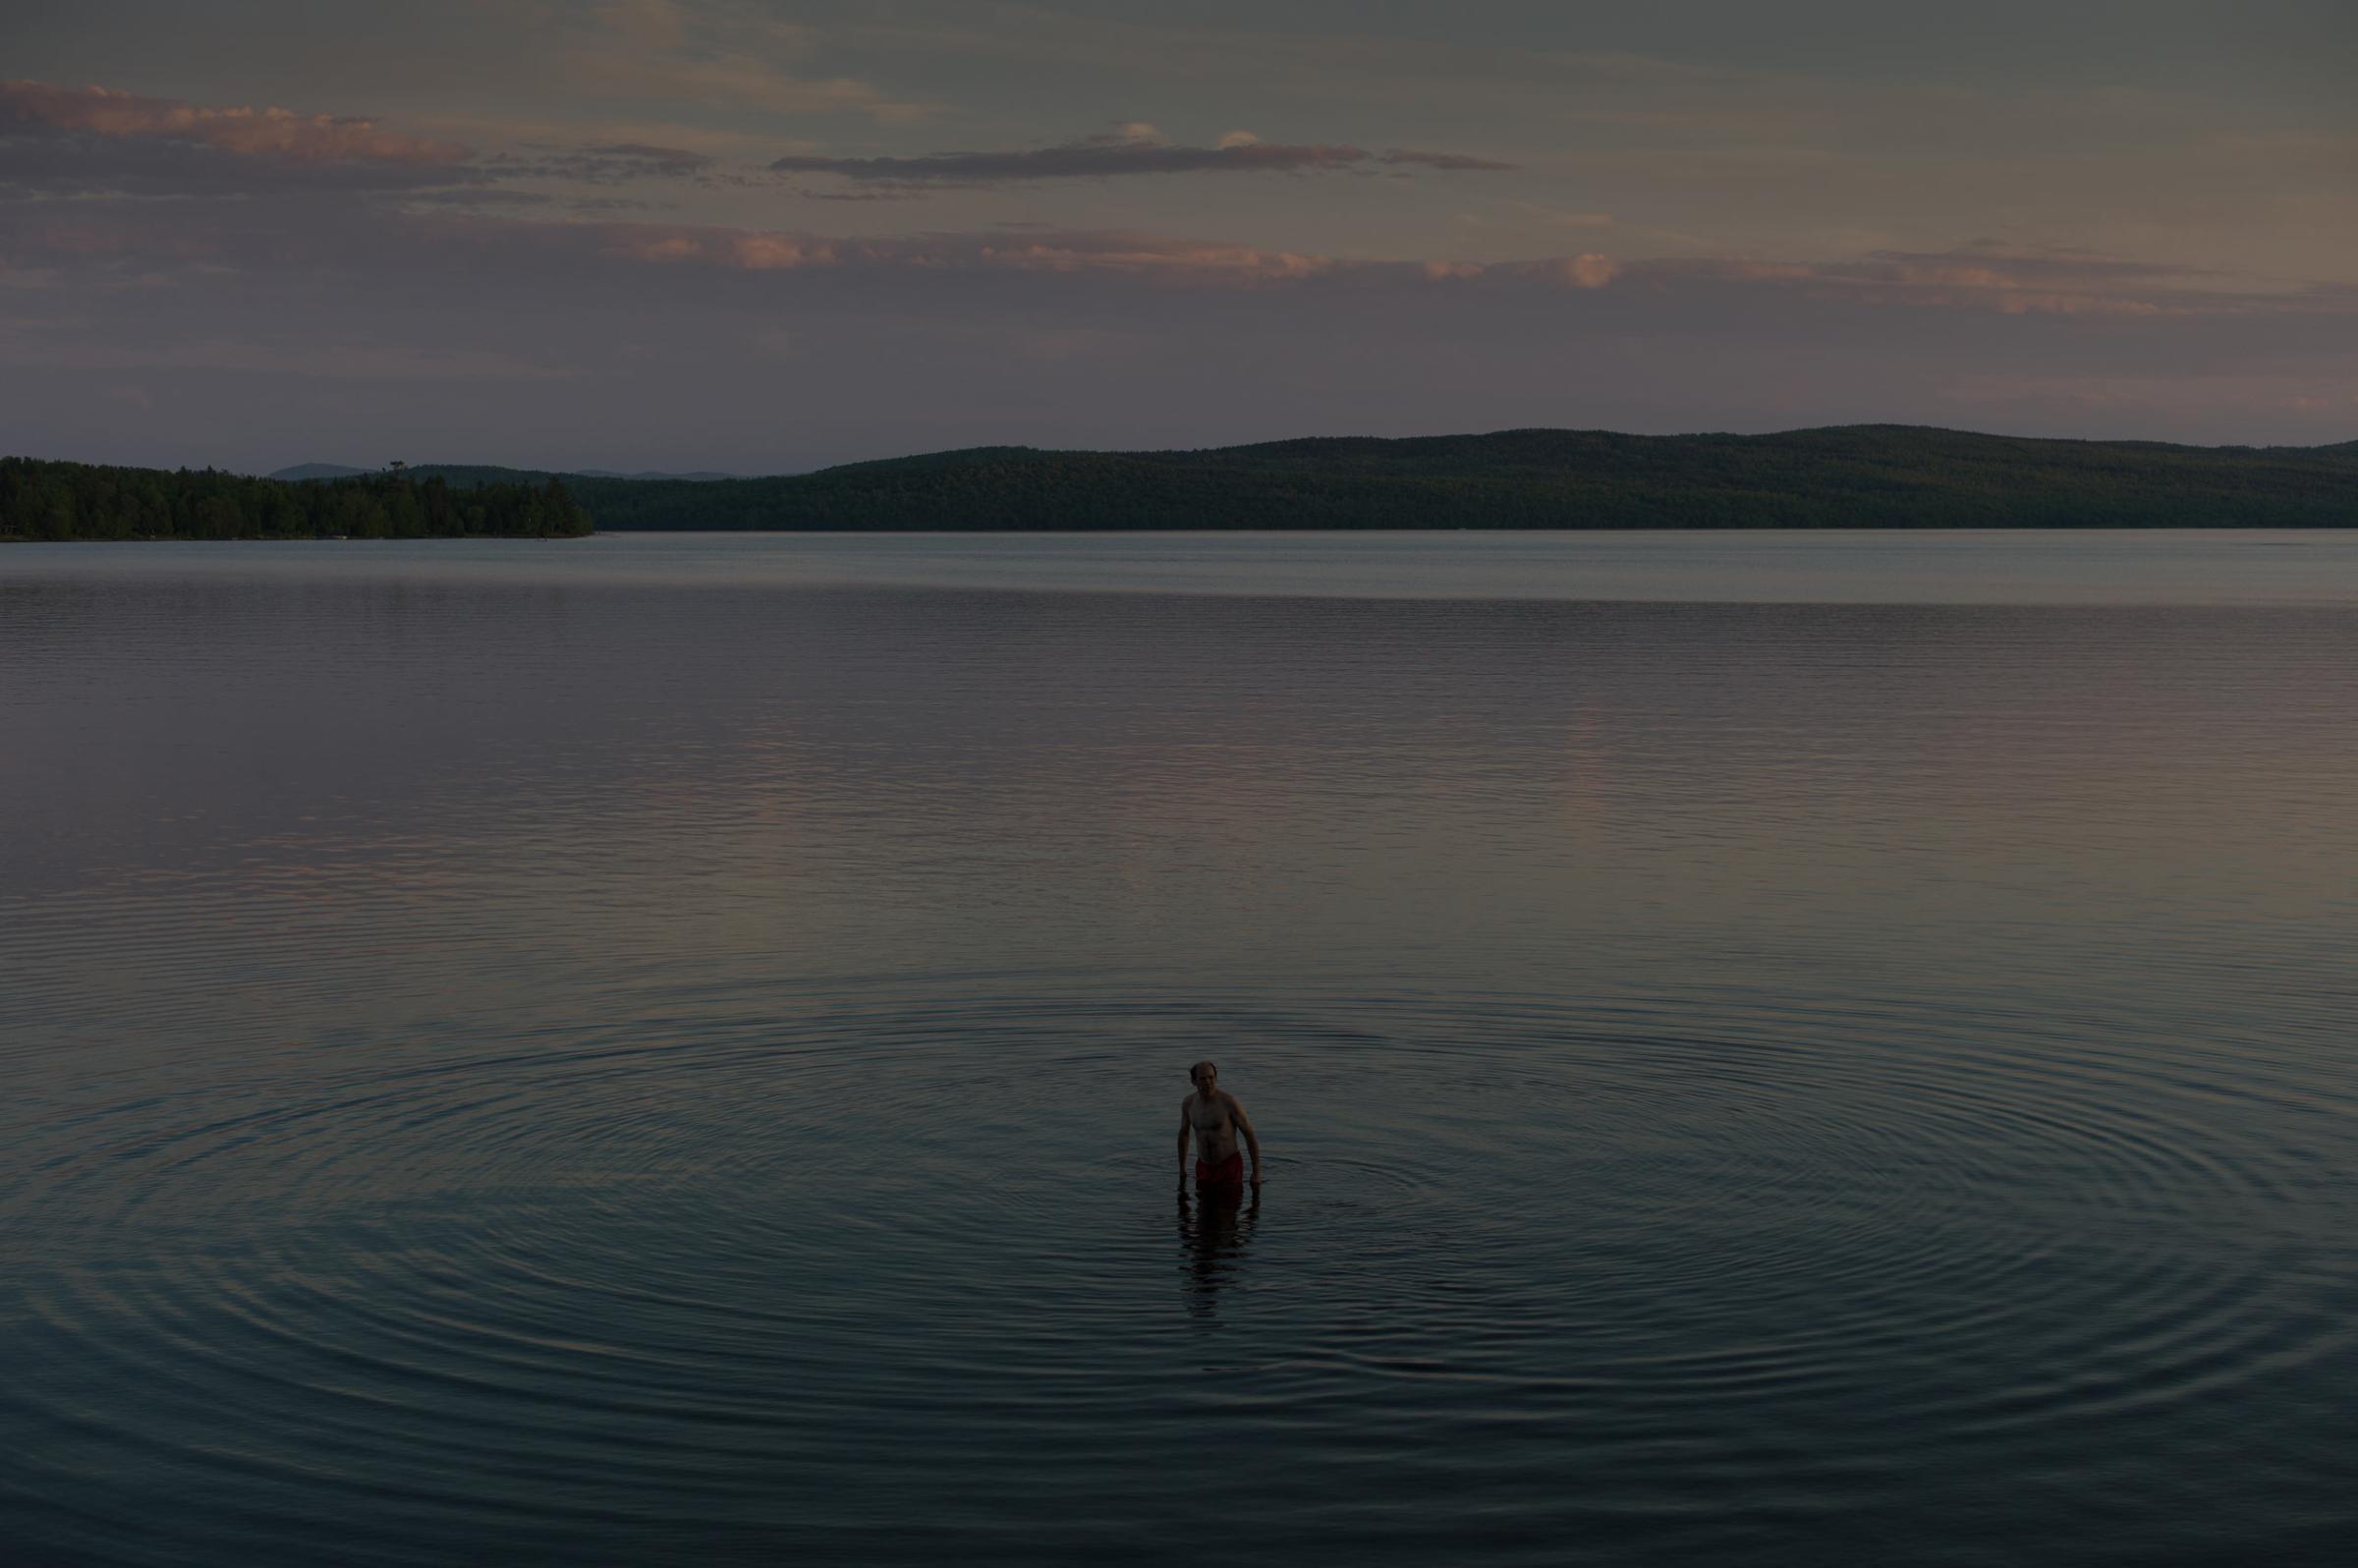 Jacques, first swim of the year in Lac MÈgantic, June 2014. From "Post MÈgantic" by Michel Huneault, winner of the 2015 Lange-Taylor Prize.